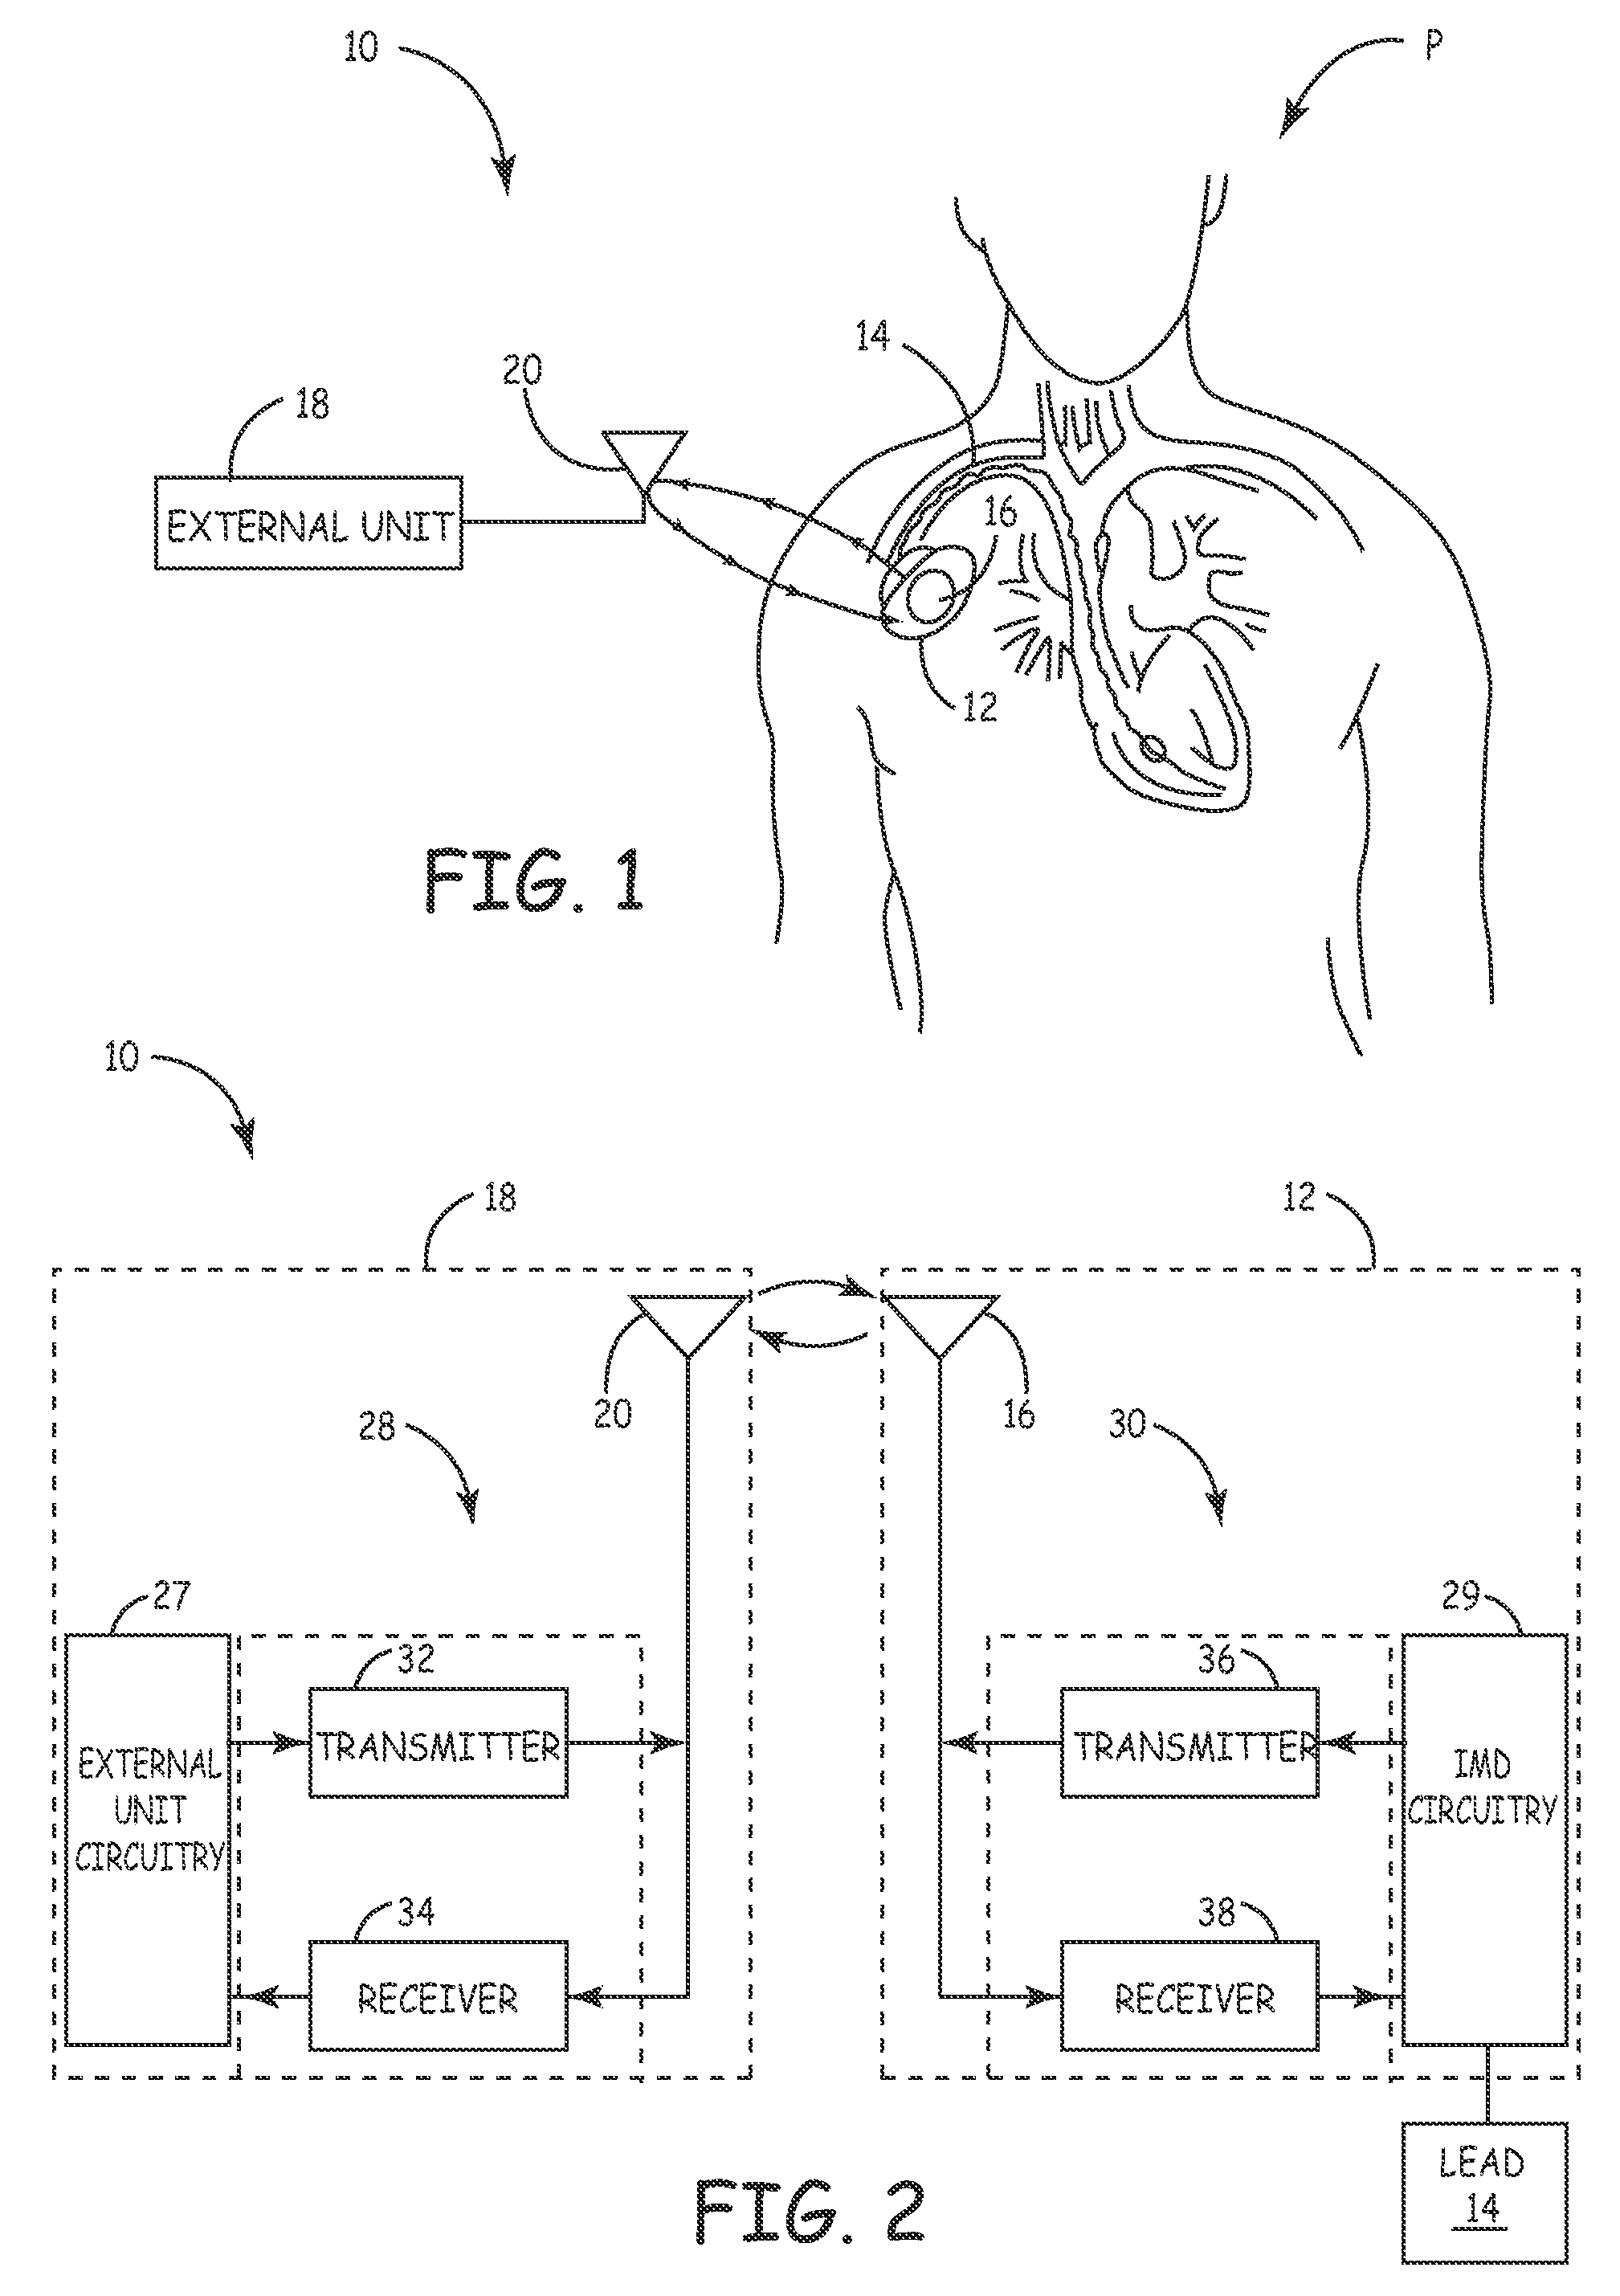 System and method for unscheduled wireless communication with a medical device